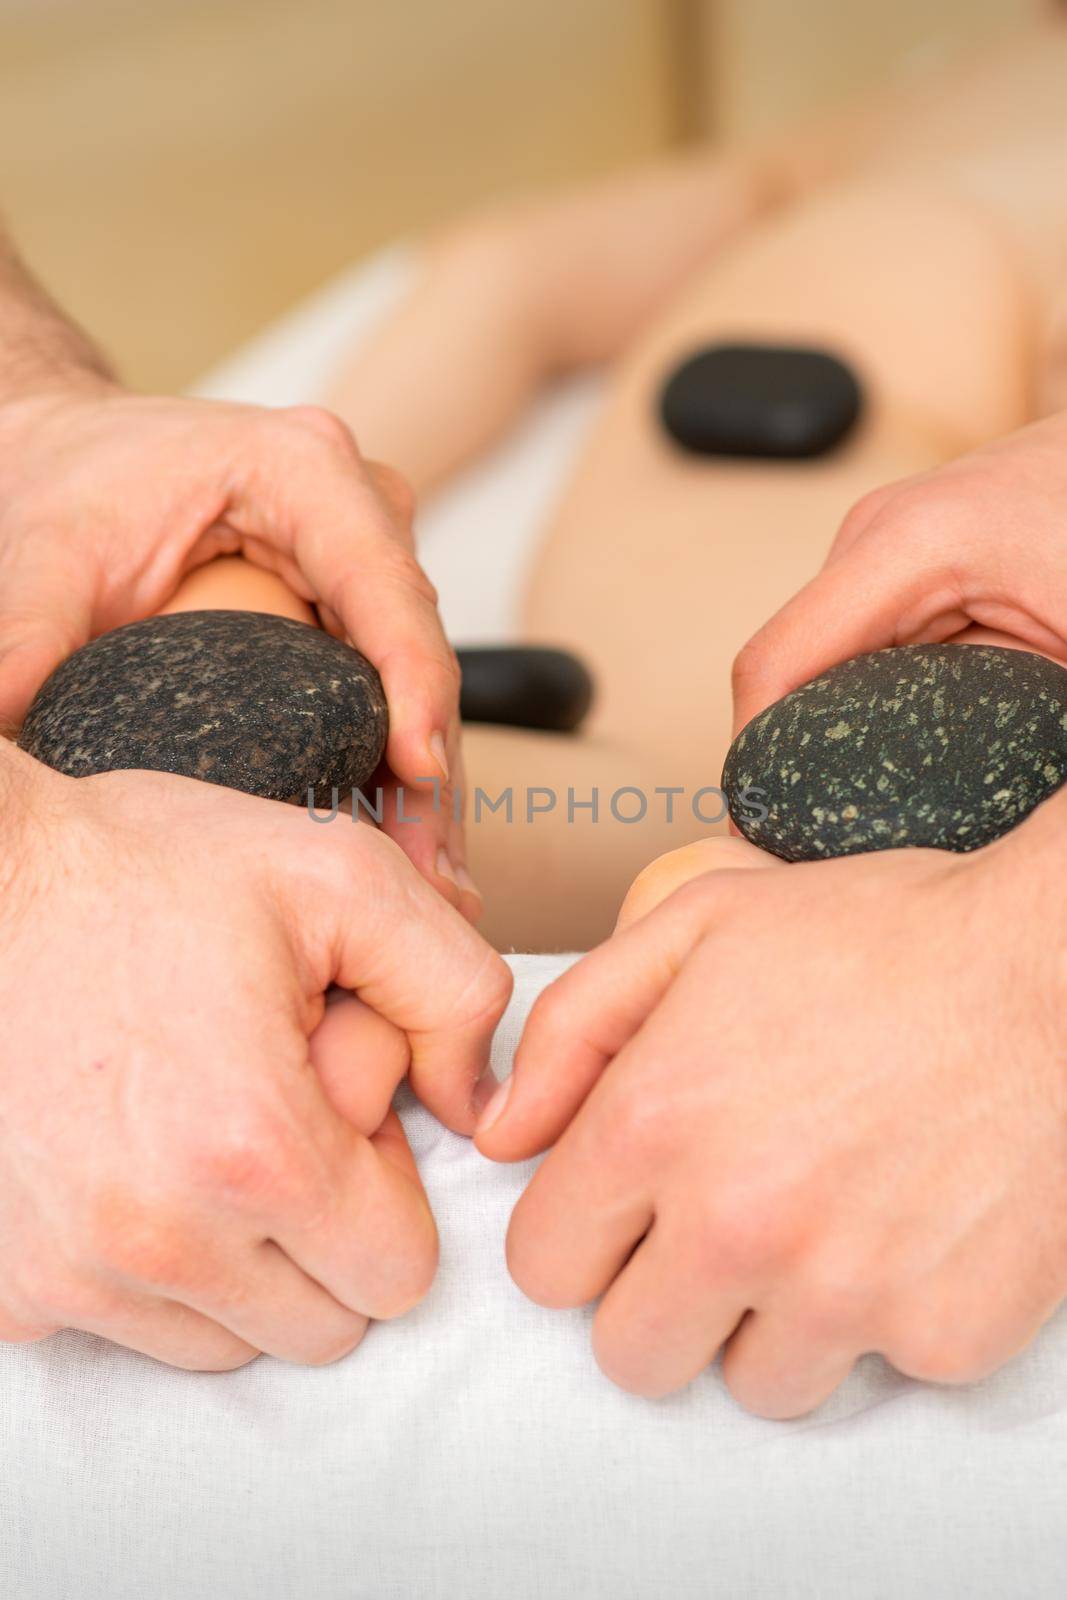 Two masseurs make a foot massage with a hot stone in four hands at the spa. by okskukuruza